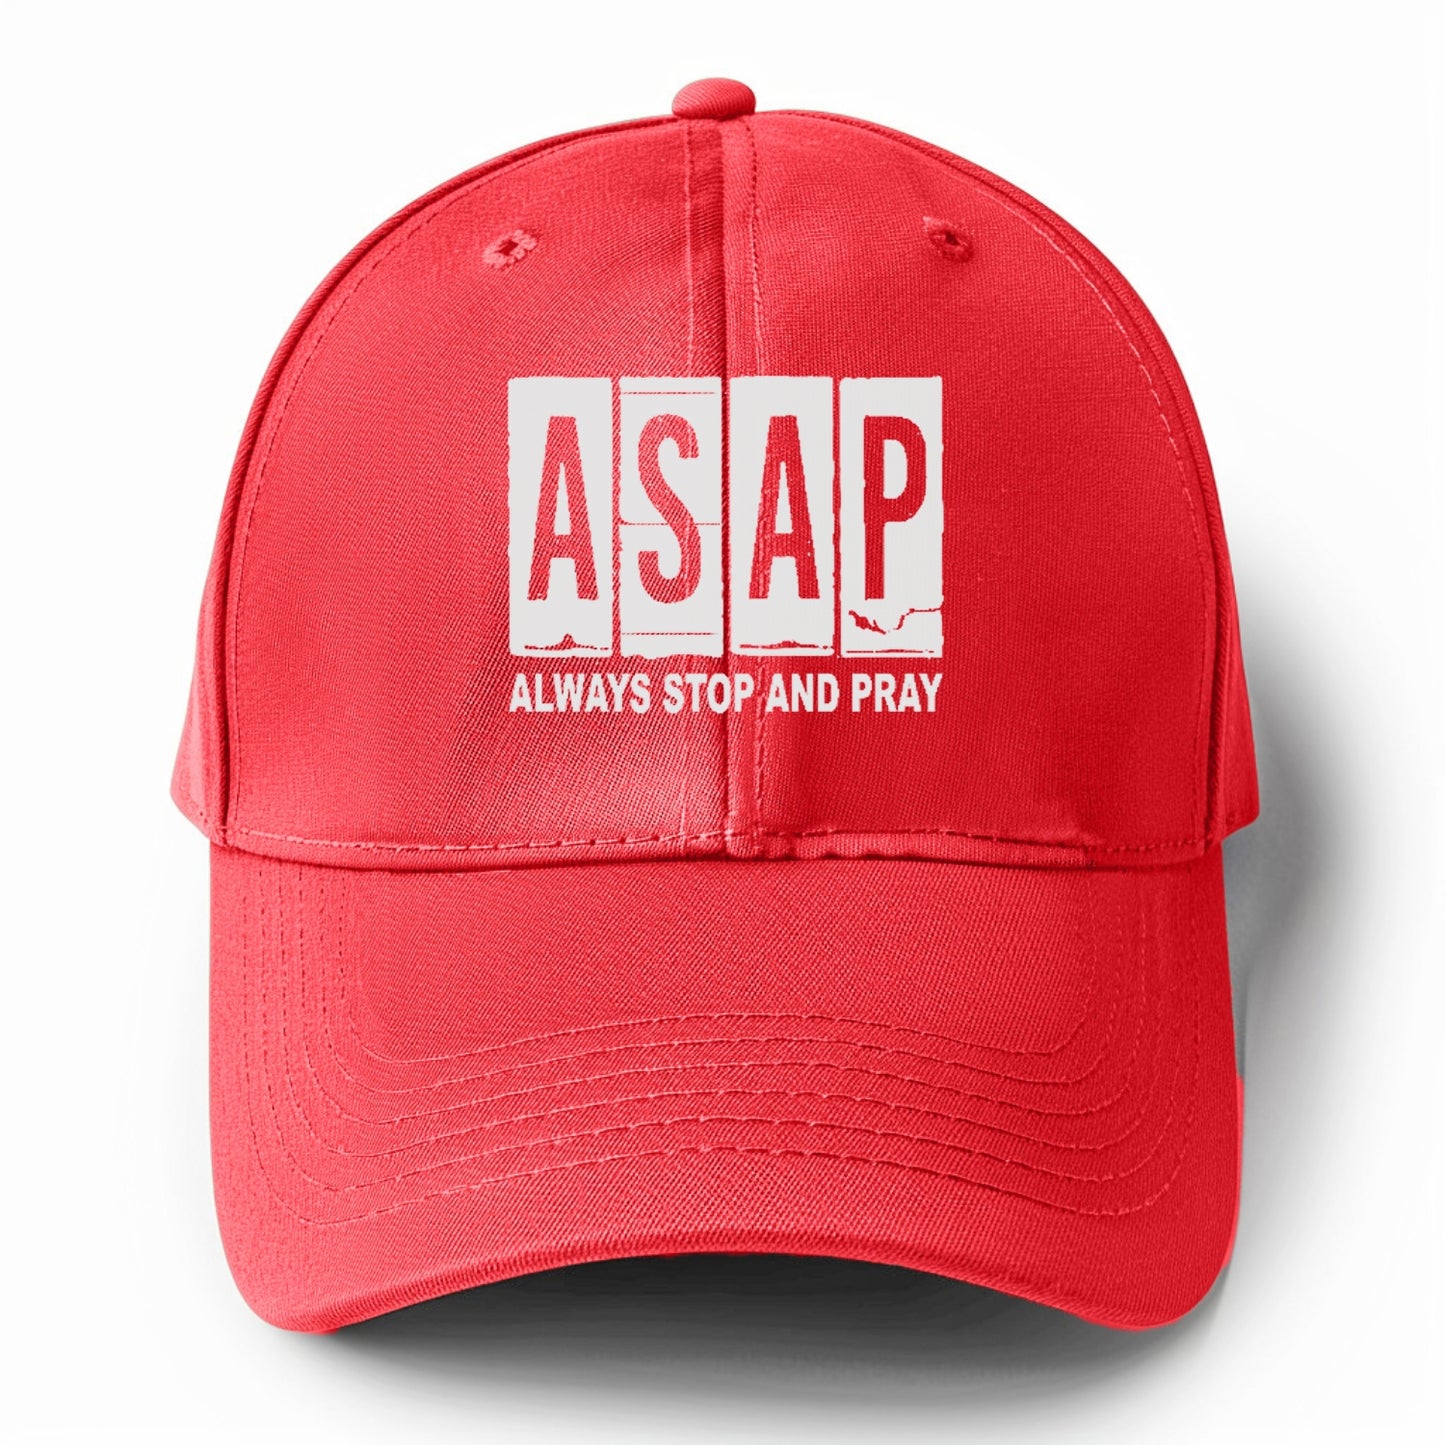 asap always stop and pray Hat